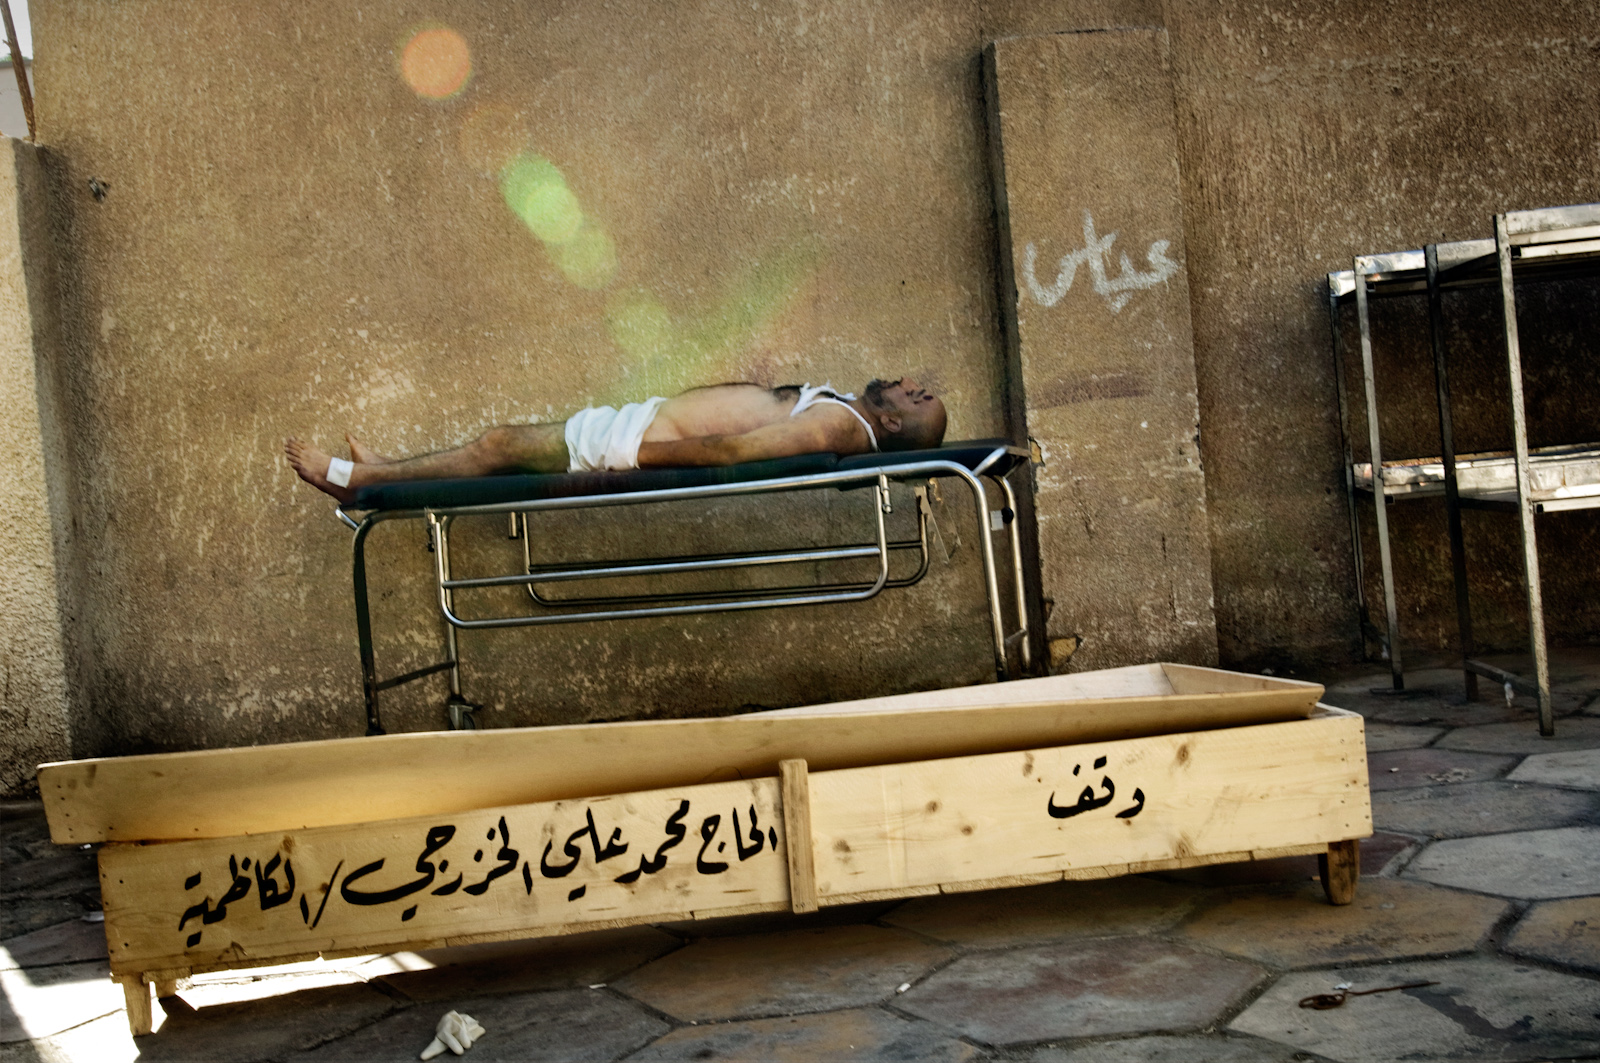 A body rests on a gurney at the Yarmouk hospital morgue in Baghdad, Iraq on July 26, 2006. People make a pilgrimage here every day in search of lost relatives that have disappeared during the night. In the previous night, 19 bodies were found in different neighborhoods throughout the city as a result of the sectarian bloodshed that is plaguing the country.